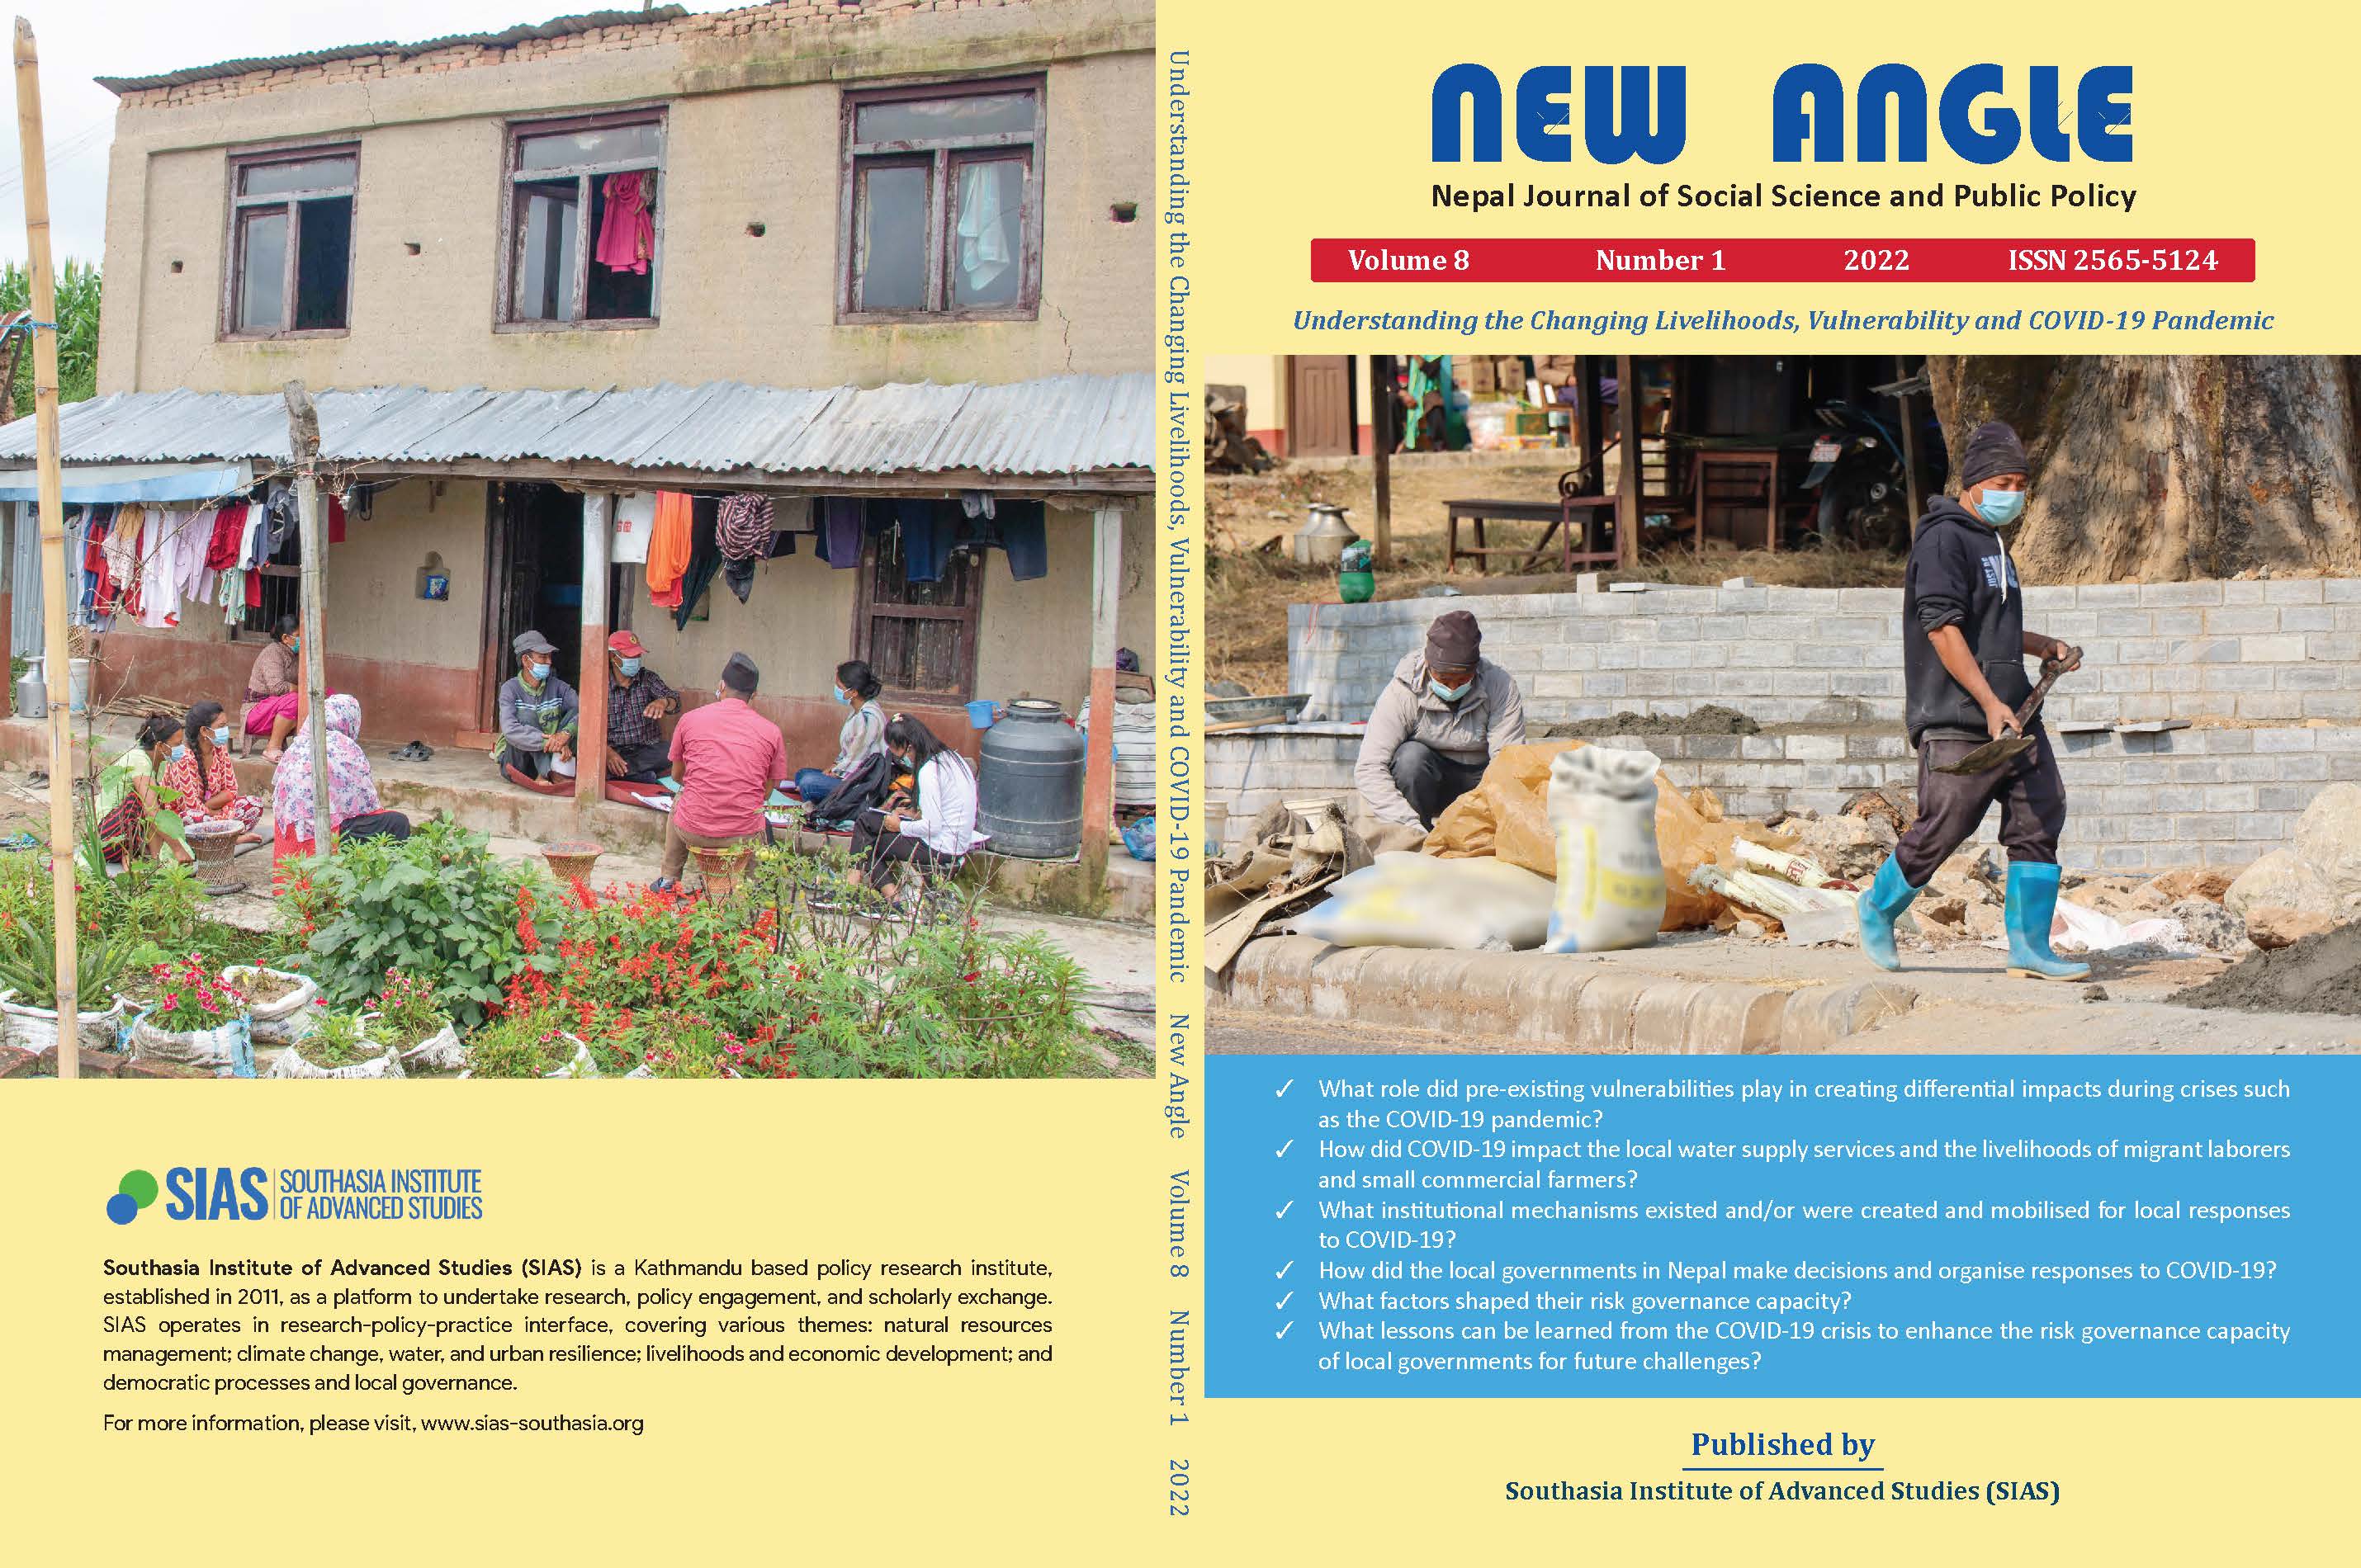 					View Vol. 8 No. 1 (2022): Understanding the Changing Livelihoods, Vulnerability and COVID-19 Pandemic
				